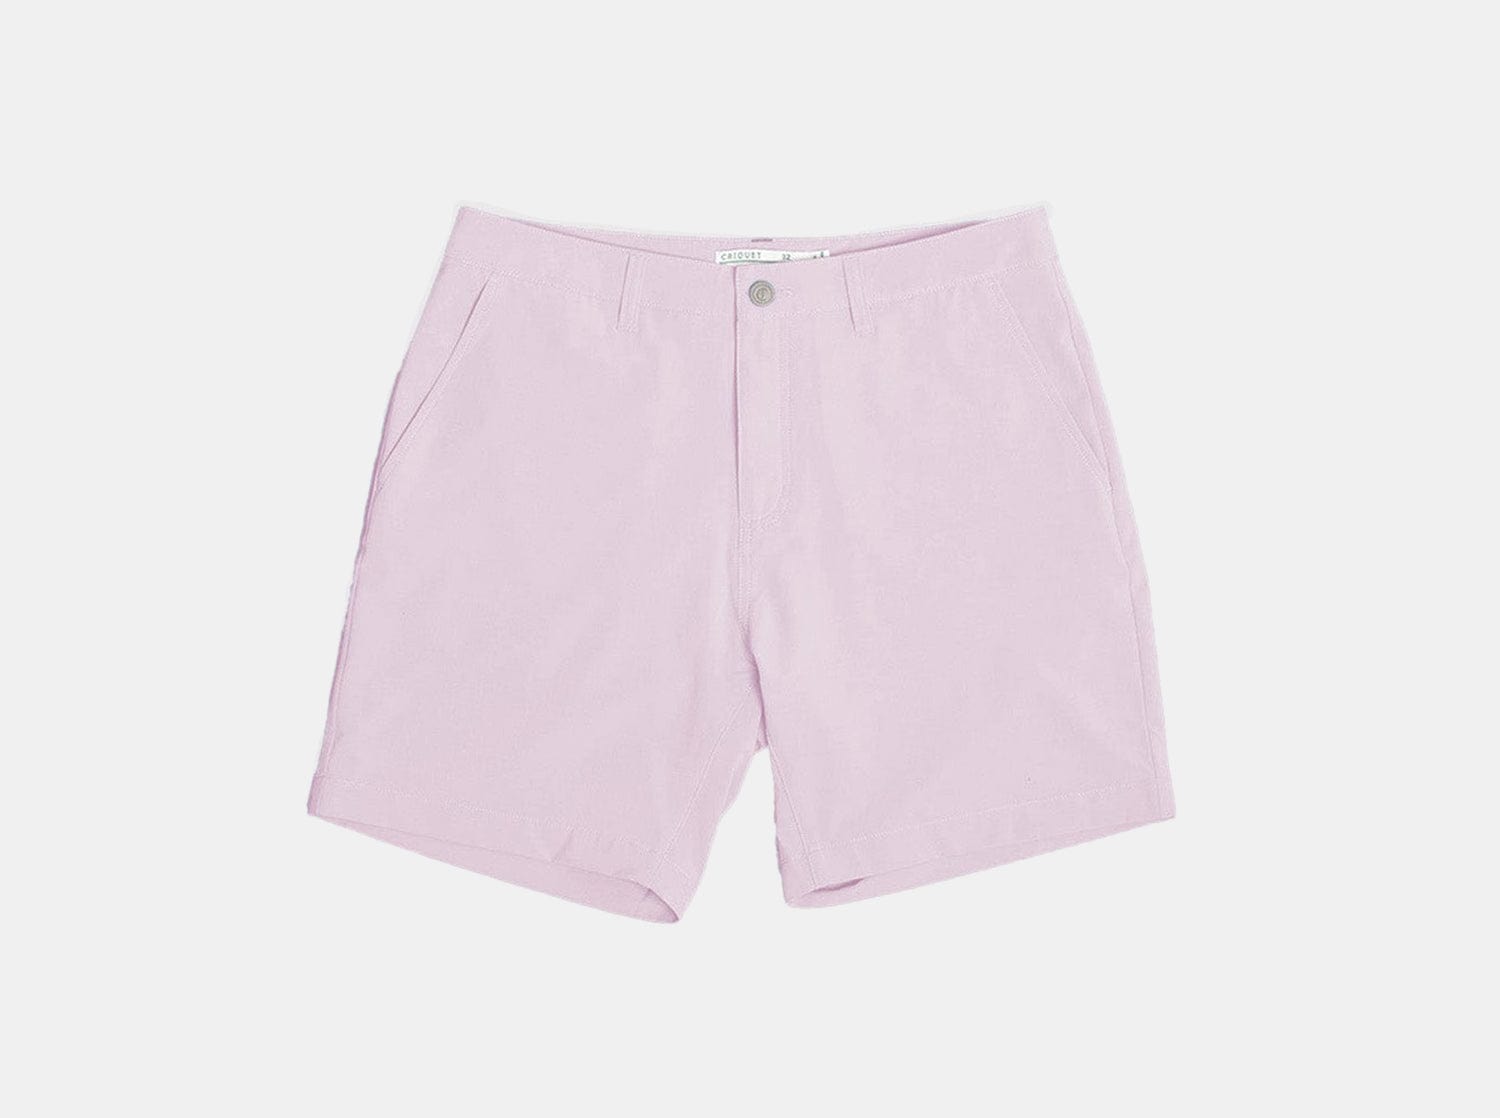 Anytime Shorts - Light Pink